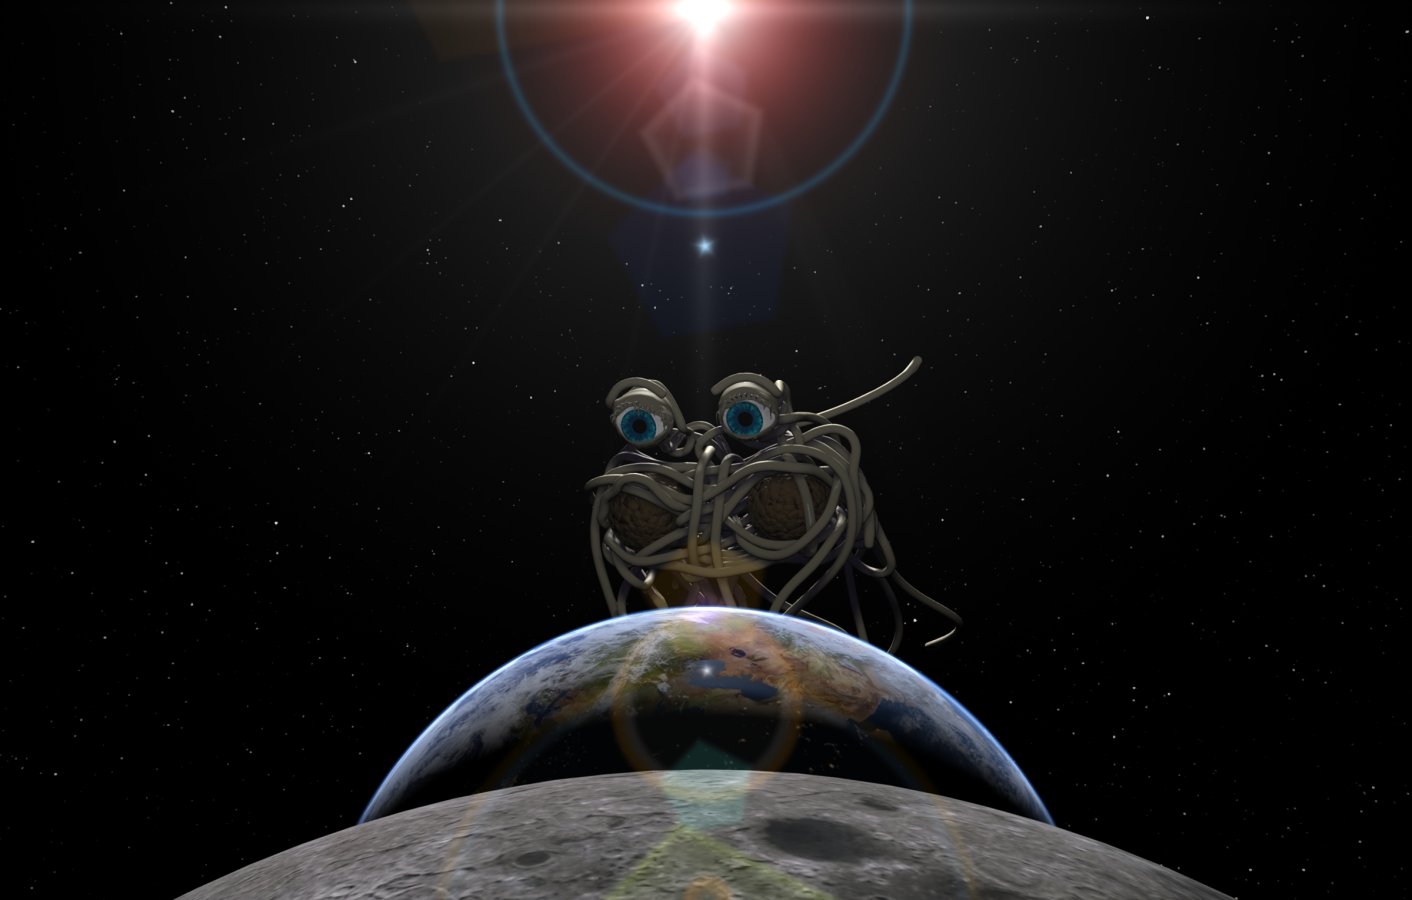 Wallpaper and Animated GIF's of the Flying Spaghetti Monster